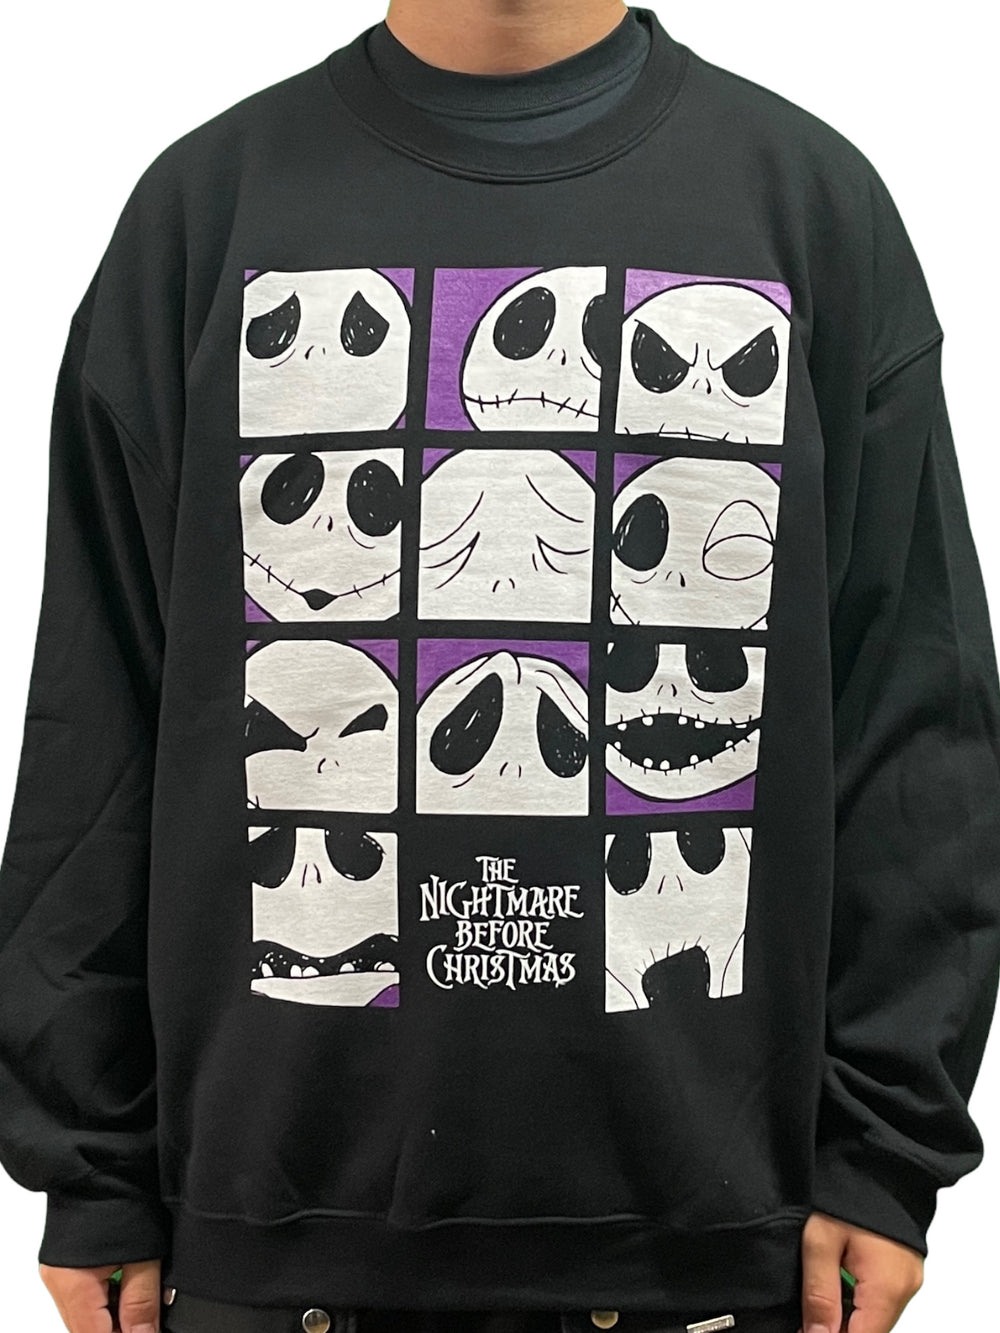 Nightmare Before Christmas Many Faces Fleece Sweater Long Sleeved Brand New